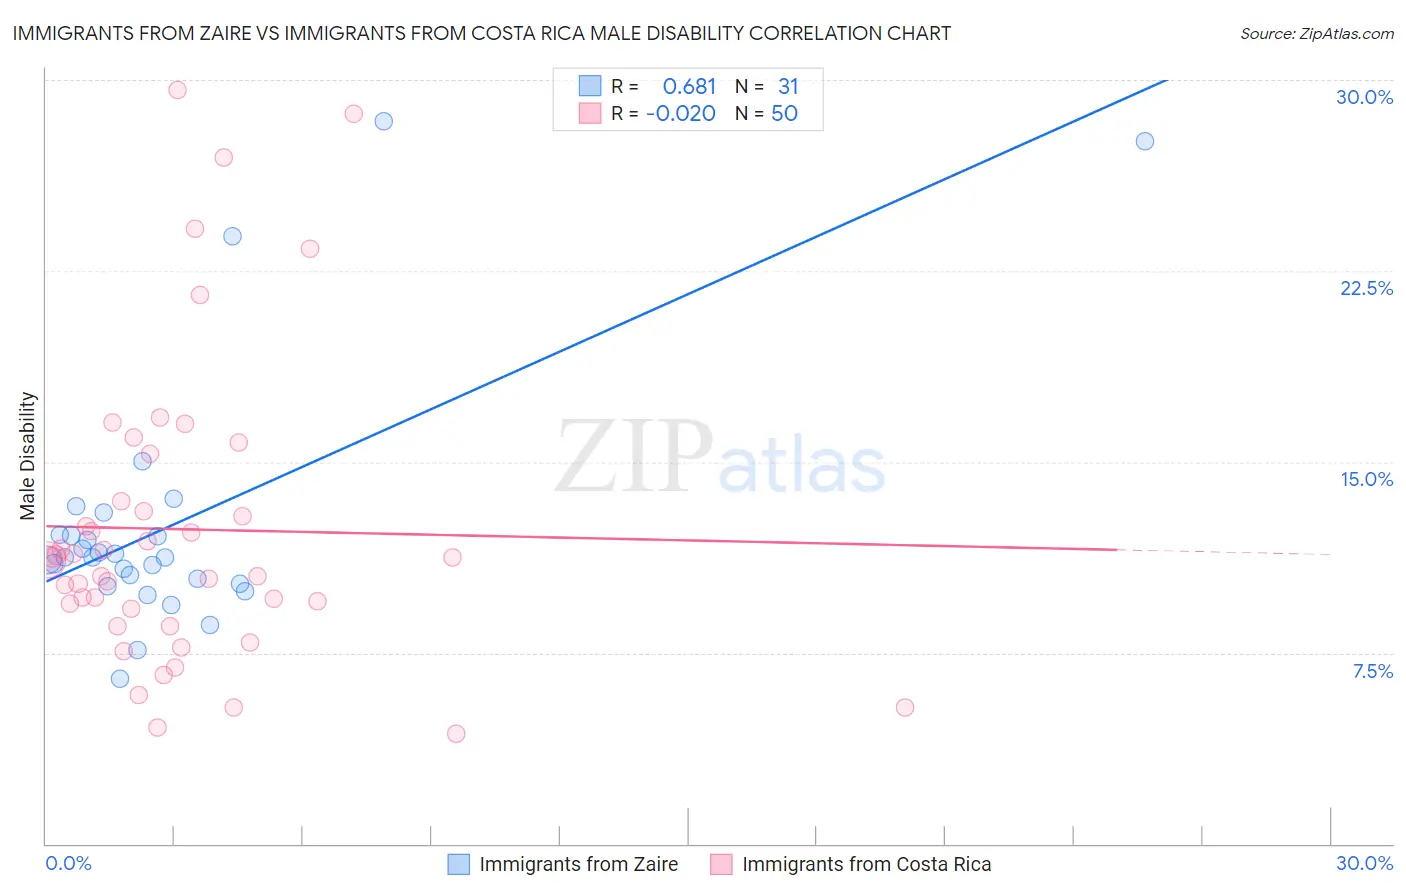 Immigrants from Zaire vs Immigrants from Costa Rica Male Disability